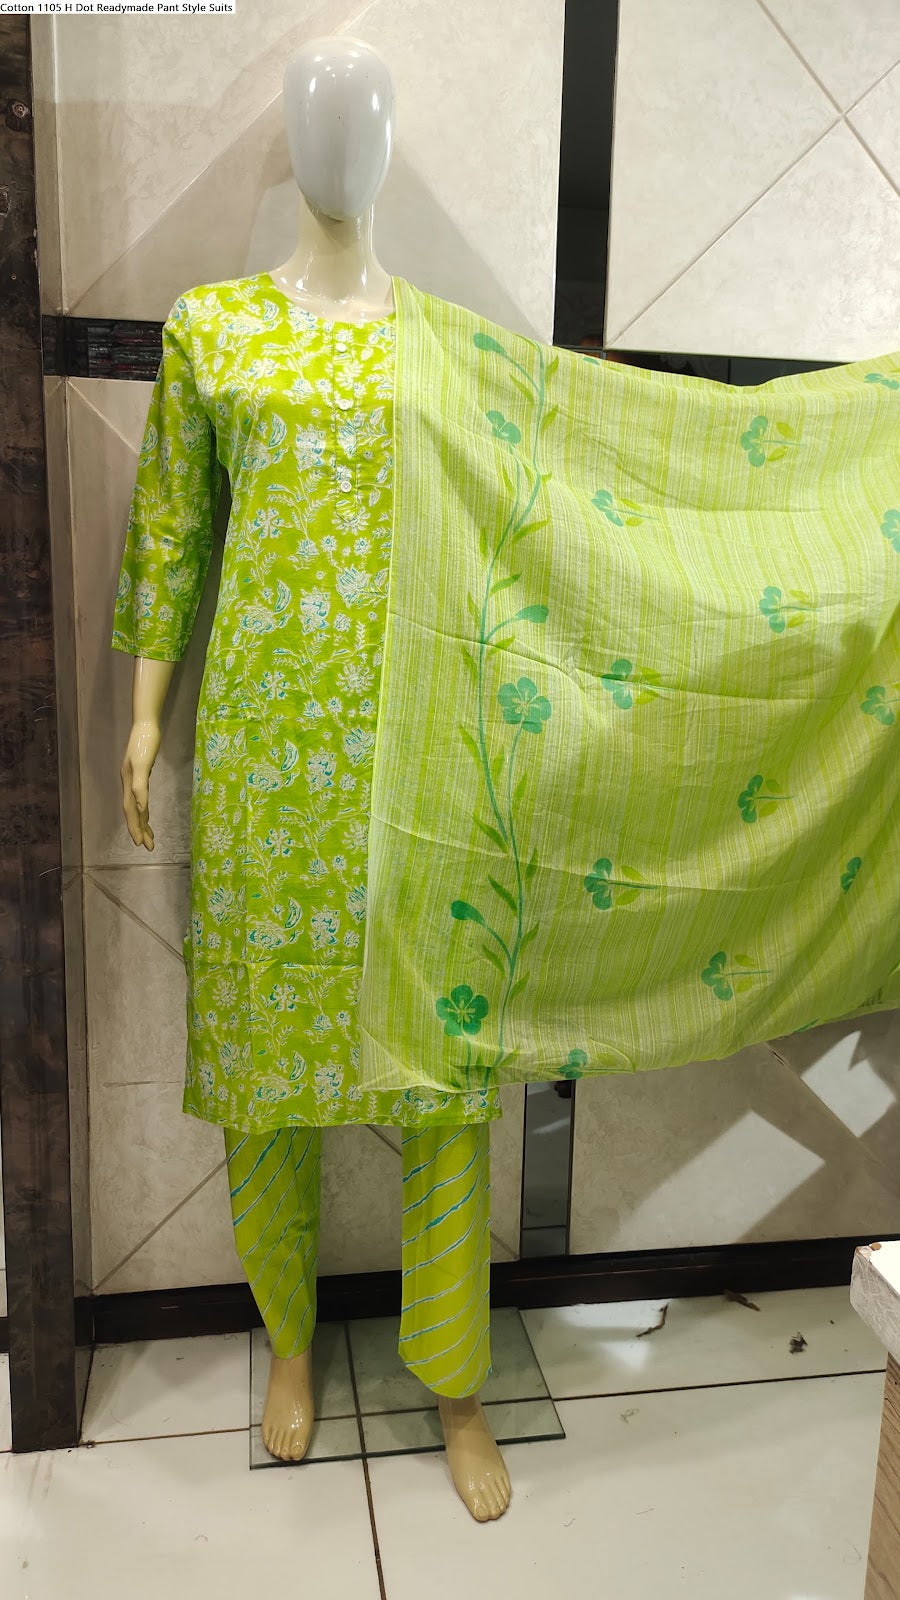 Cotton 1105 H Dot Readymade Pant Style Suits Exporter Ahmedabad